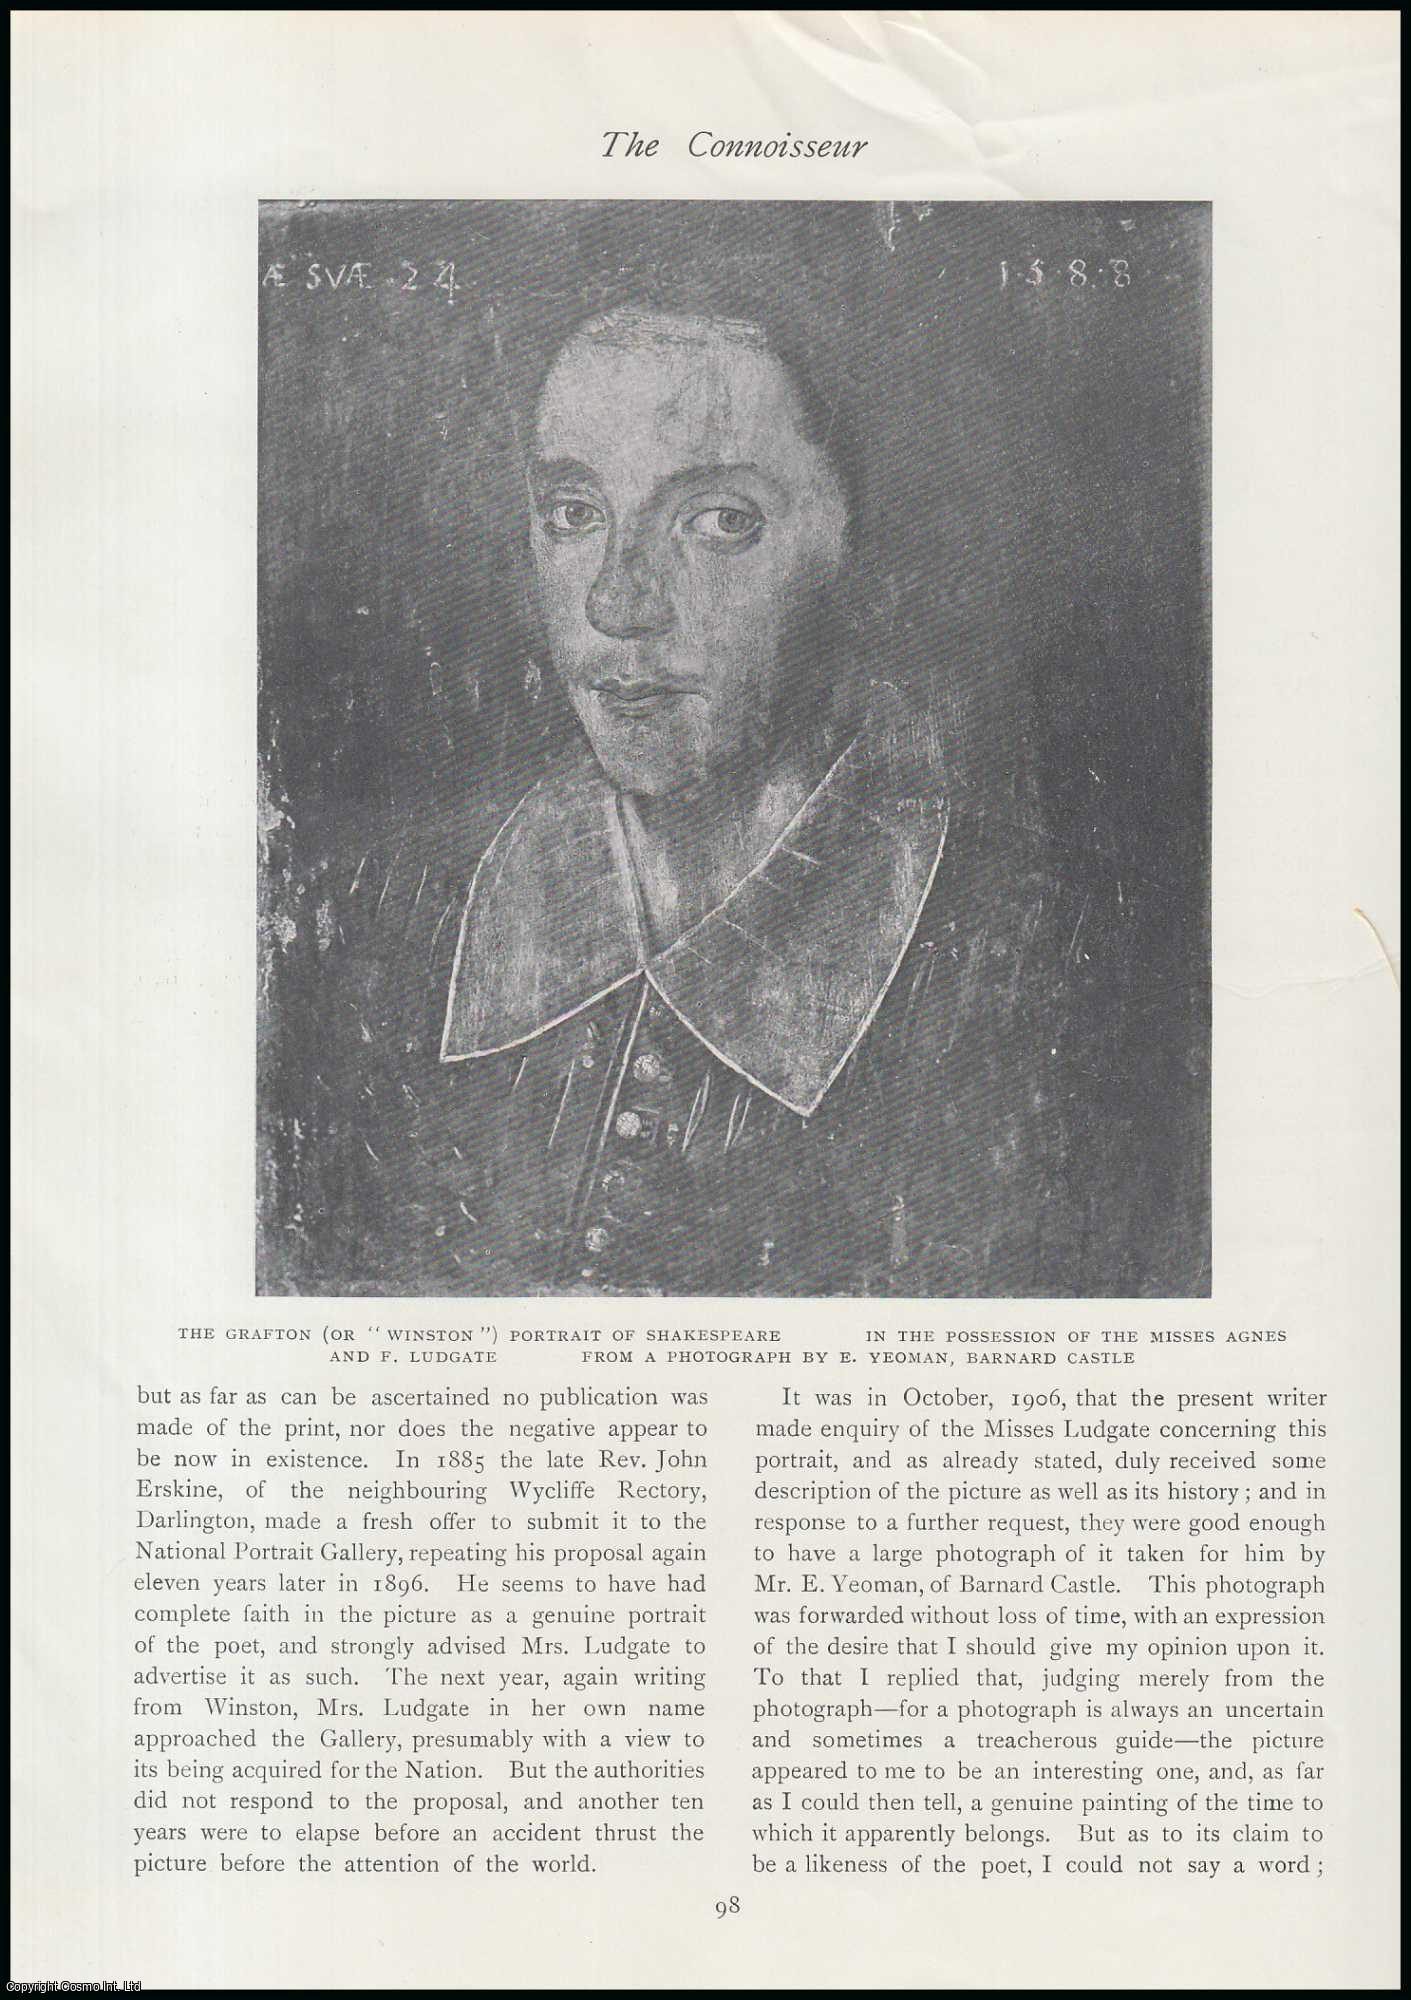 M.H. Spielmann - The Grafton and Sanders Portraits of Shakespeare. An original article from The Connoisseur, 1909.